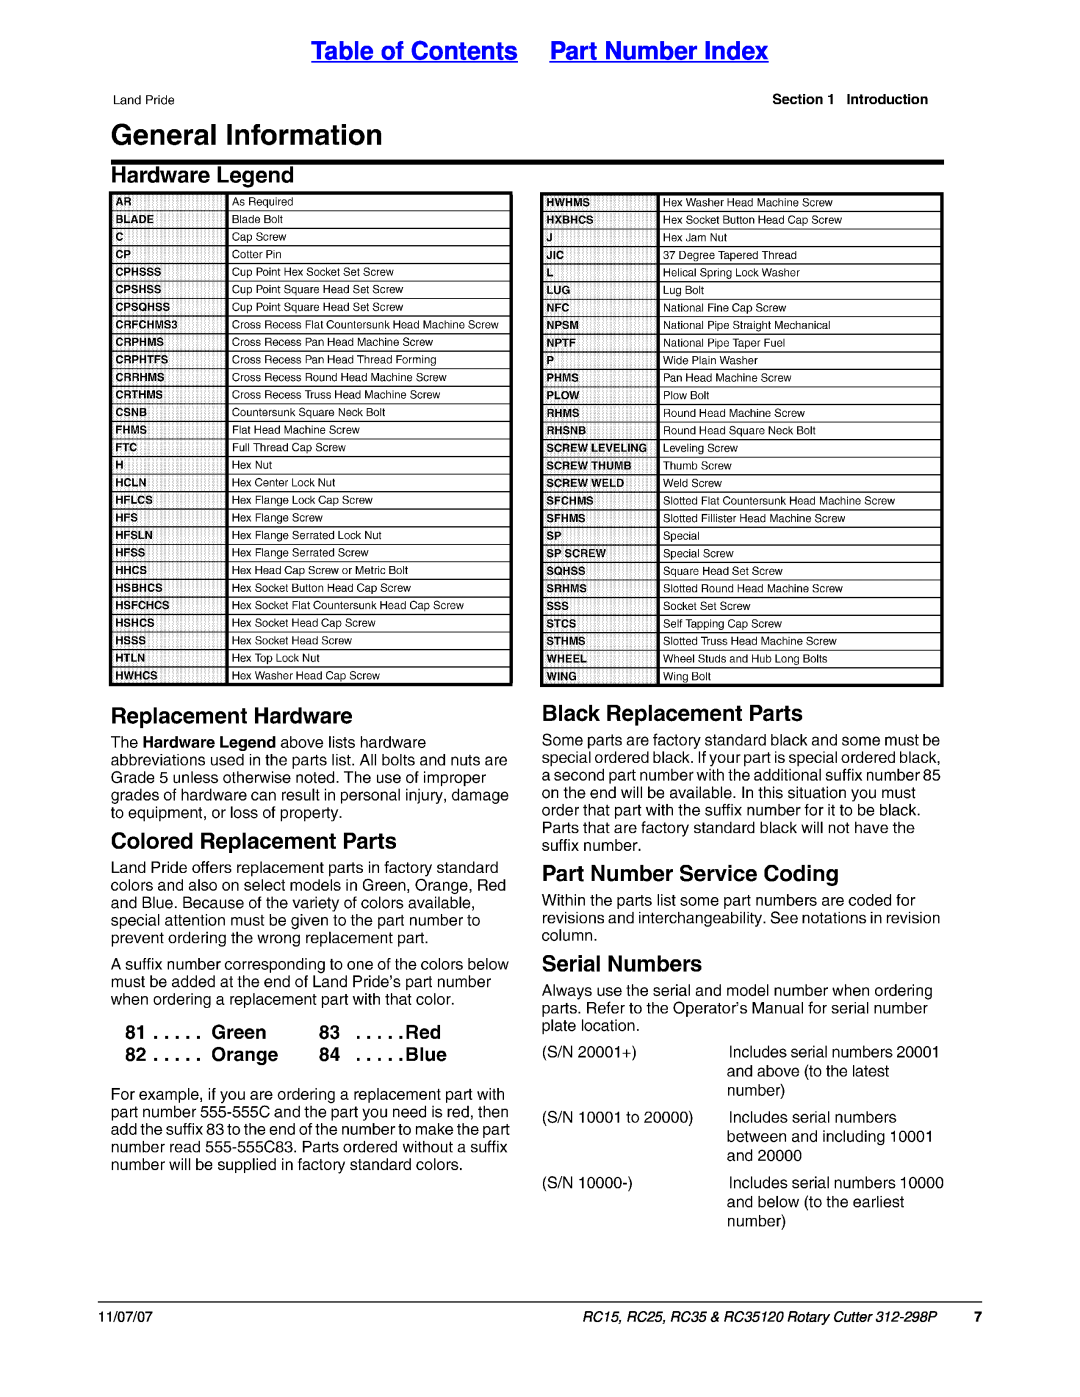 Land Pride manual Table of Contents Part Number Index, RC15, RC25, RC35 & RC35120 Rotary Cutter 312-298P, 11/07/07 